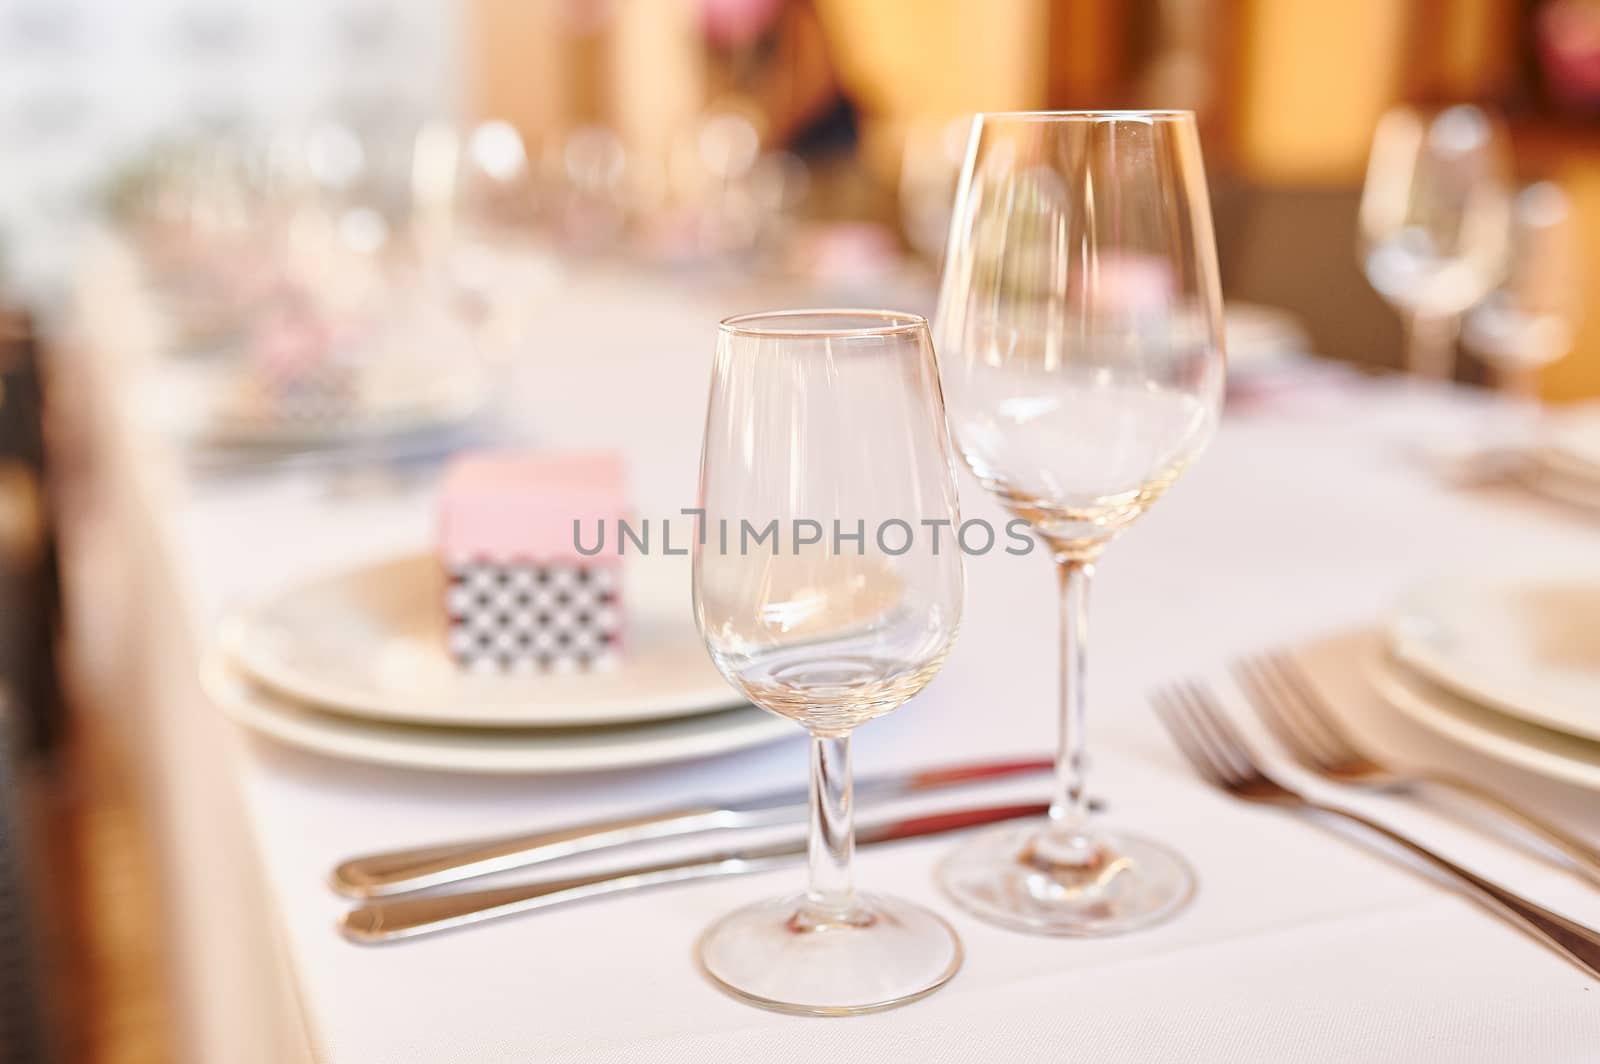 Serving table for a wedding banquet in a restaurant by timonko